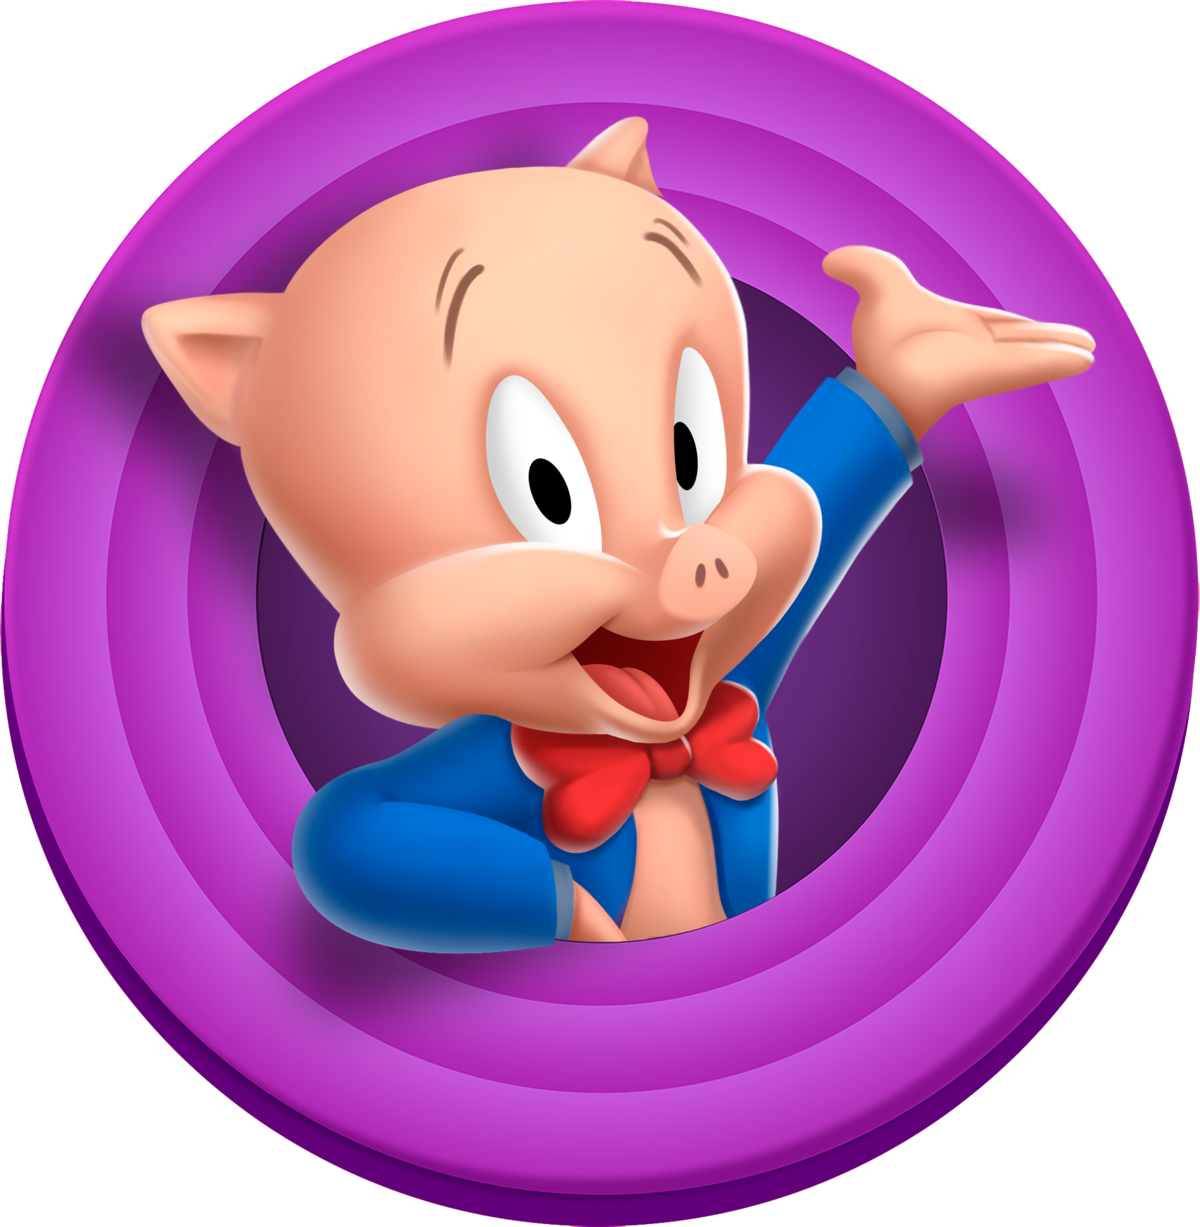 Porky Pig Looney Tunes Character PNG